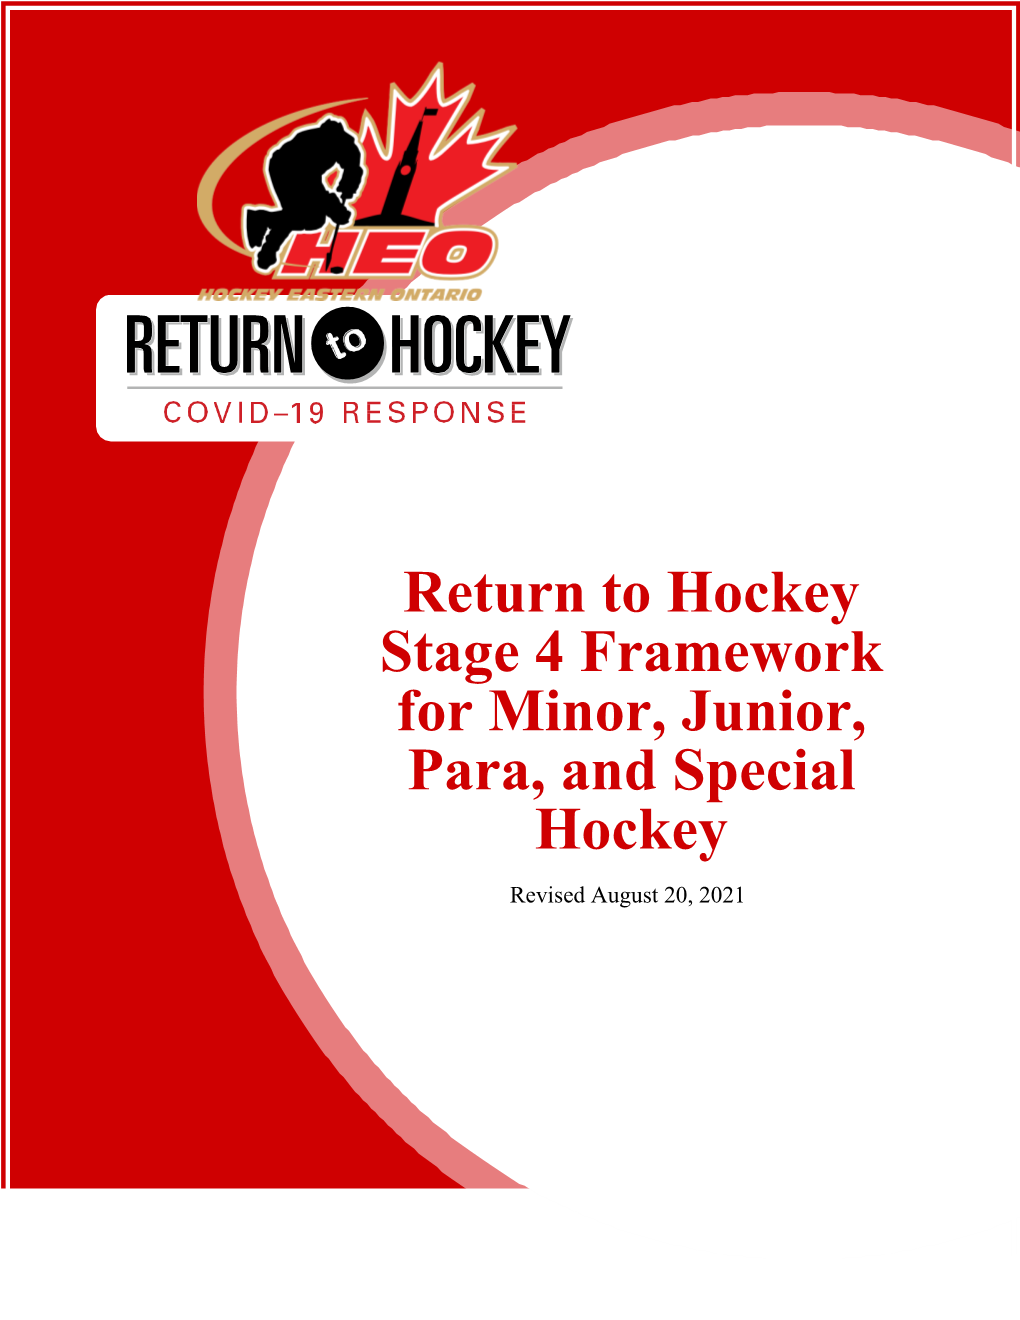 Return to Hockey Stage 4 Framework for Minor, Junior, Para, and Special Hockey Revised August 20, 2021 SECTION 1 Purpose